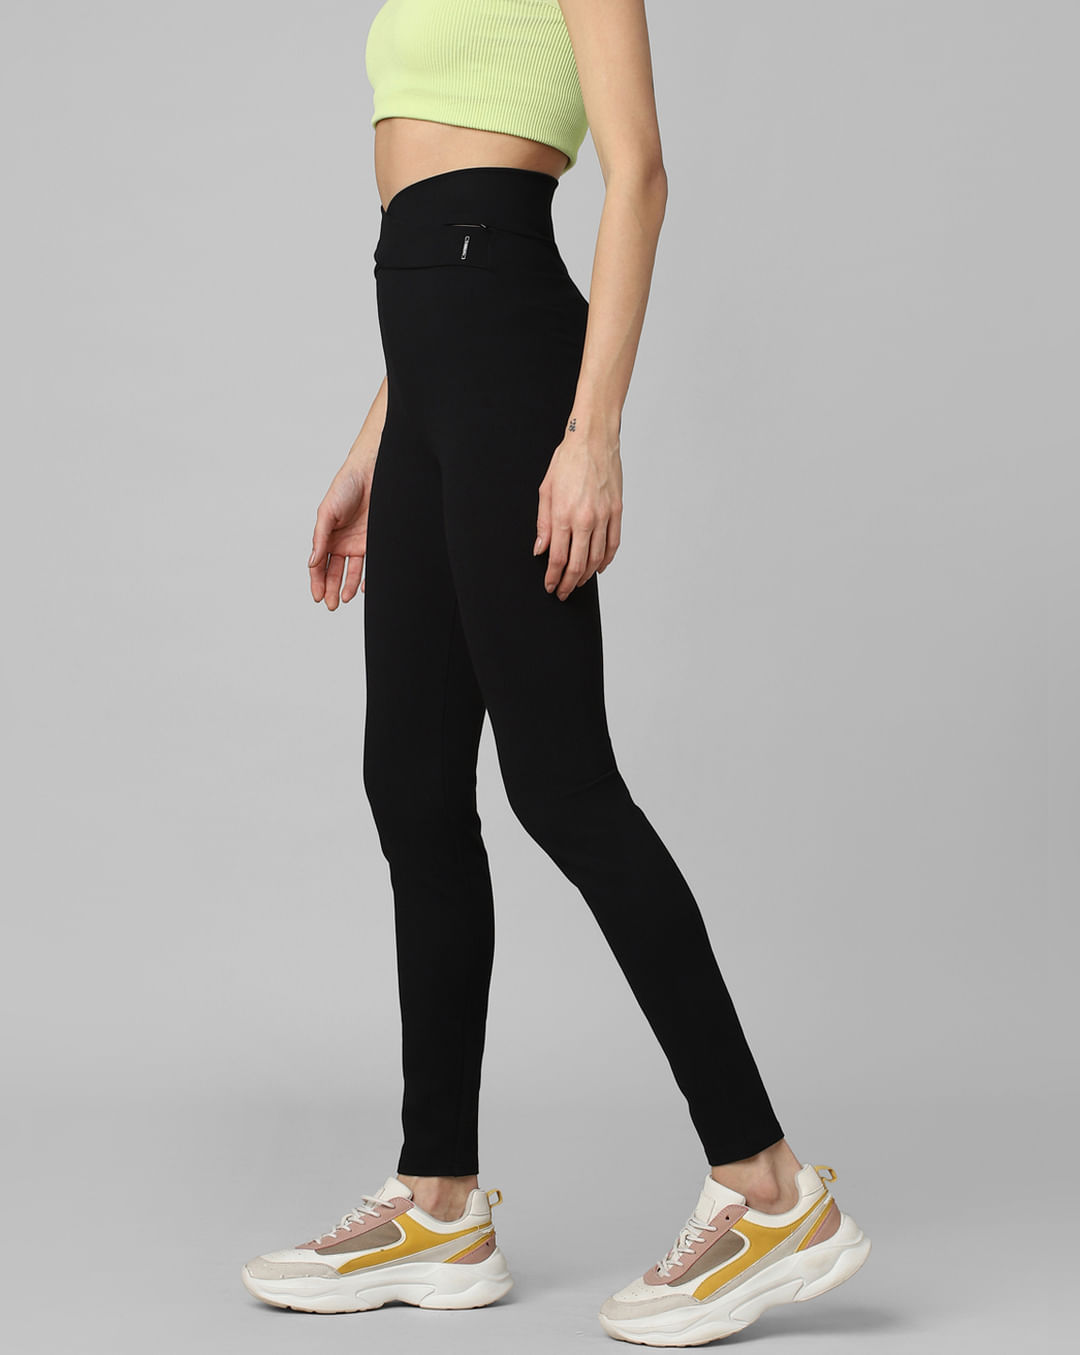 High Waist Black Women Gym Tights, Skin Fit at Rs 210 in New Delhi